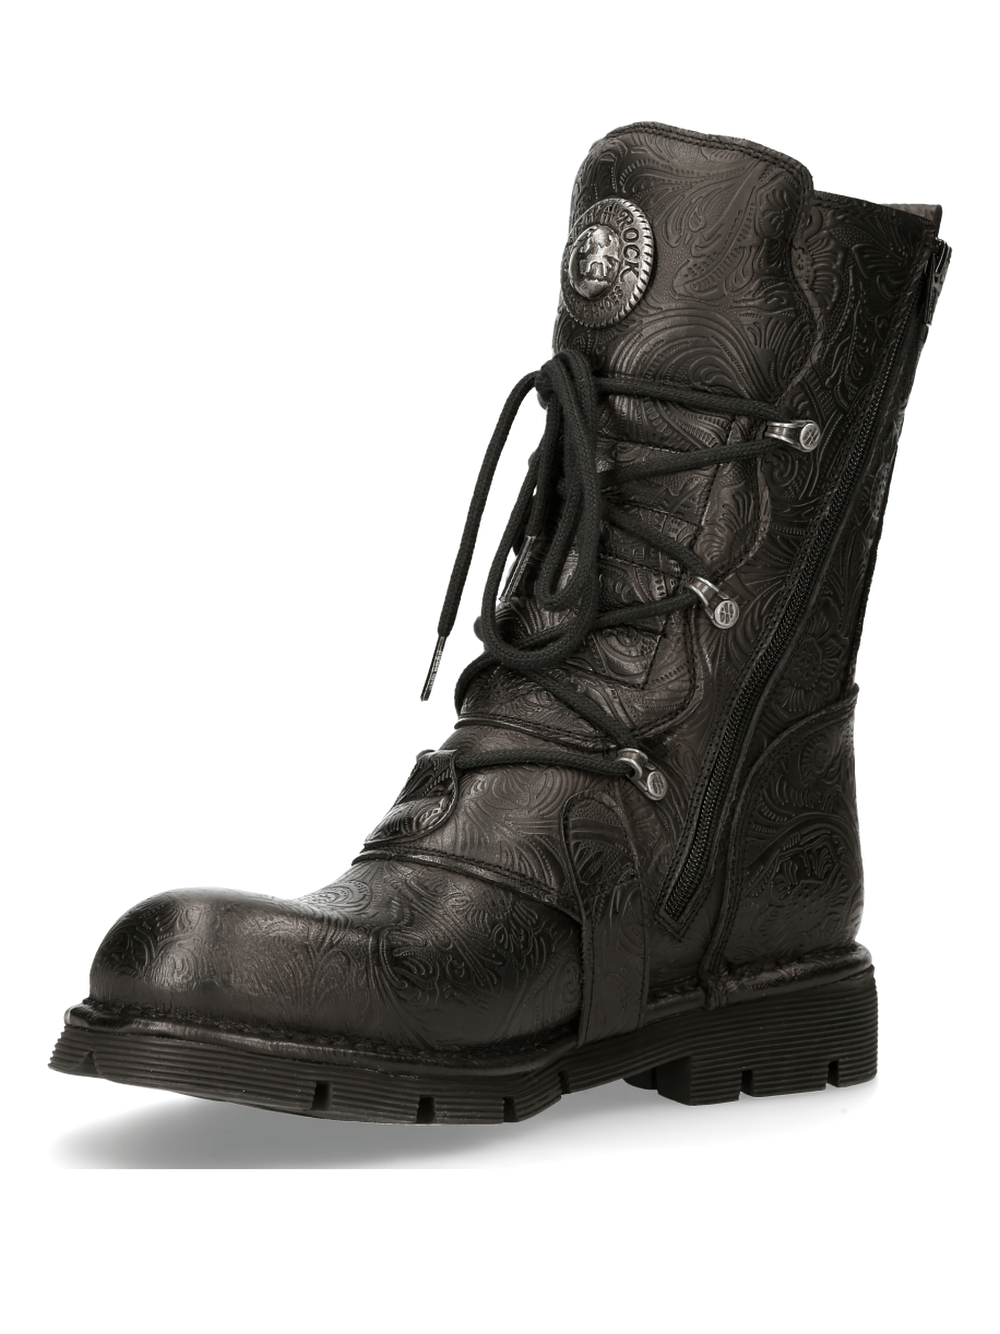 NEW ROCK Black Gothic Engraved Leather Boots with Buckles